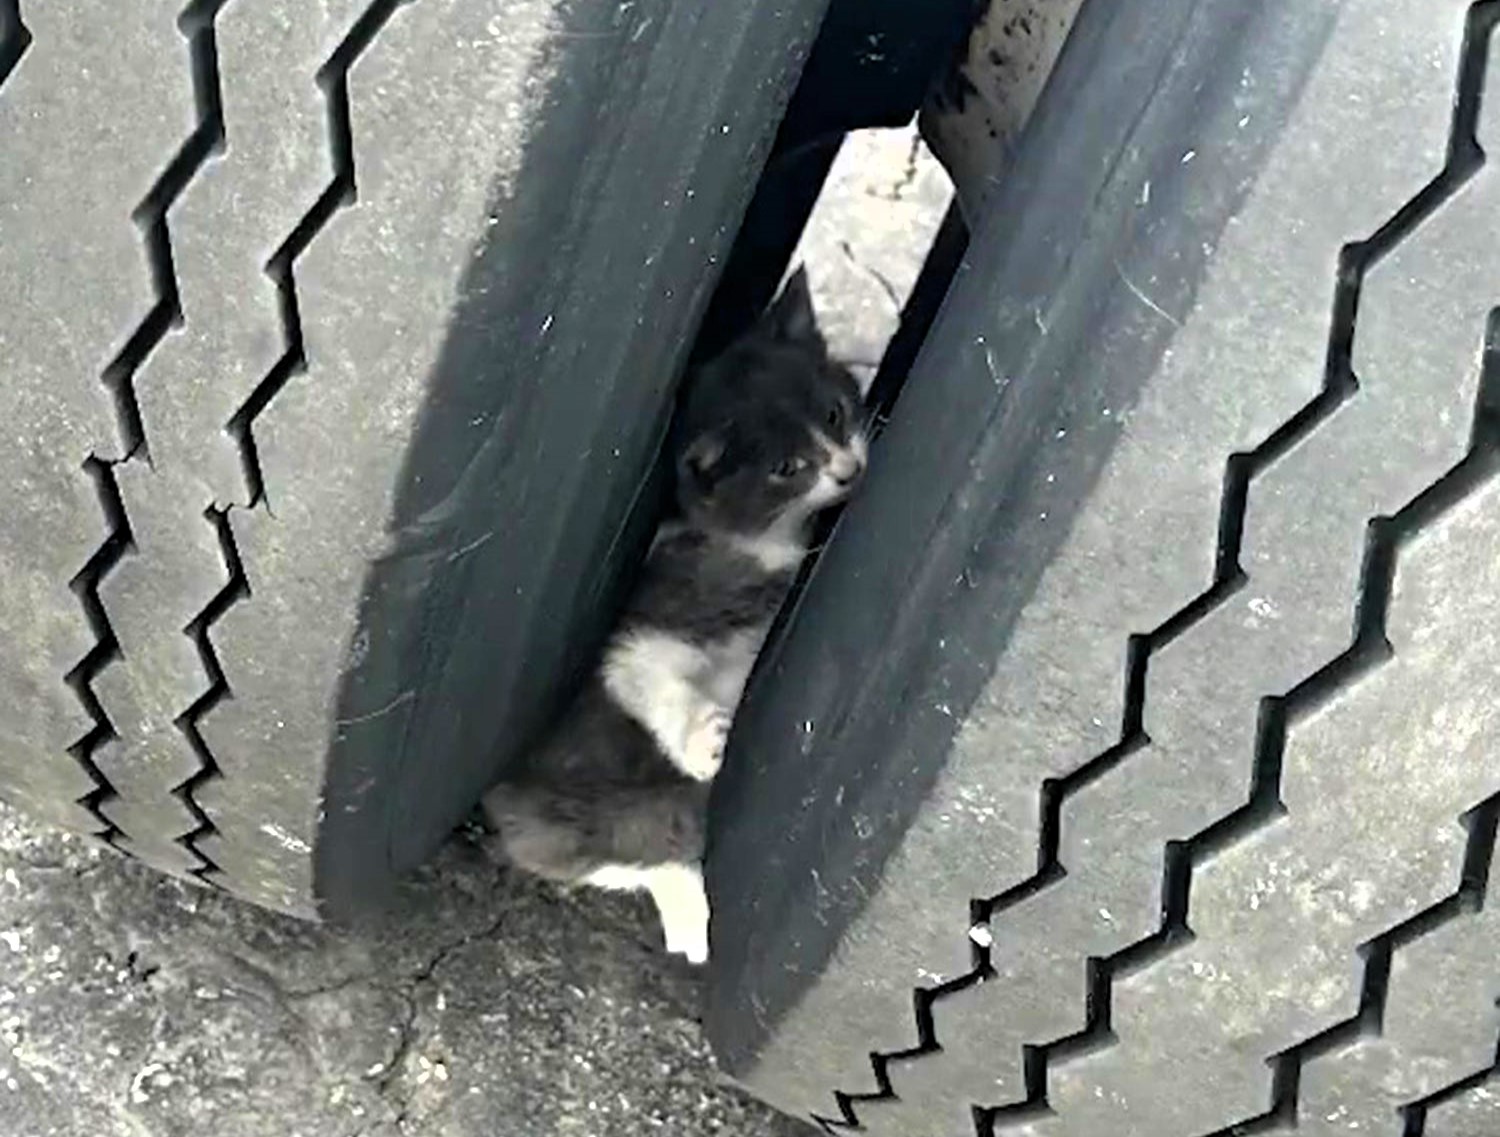 Kitten rescued from lorry tyres on Ohio Turnpike. Watch the heartwarming rescue by Ohio State Highway Patrol, ensuring a safe outcome for the curious feline.